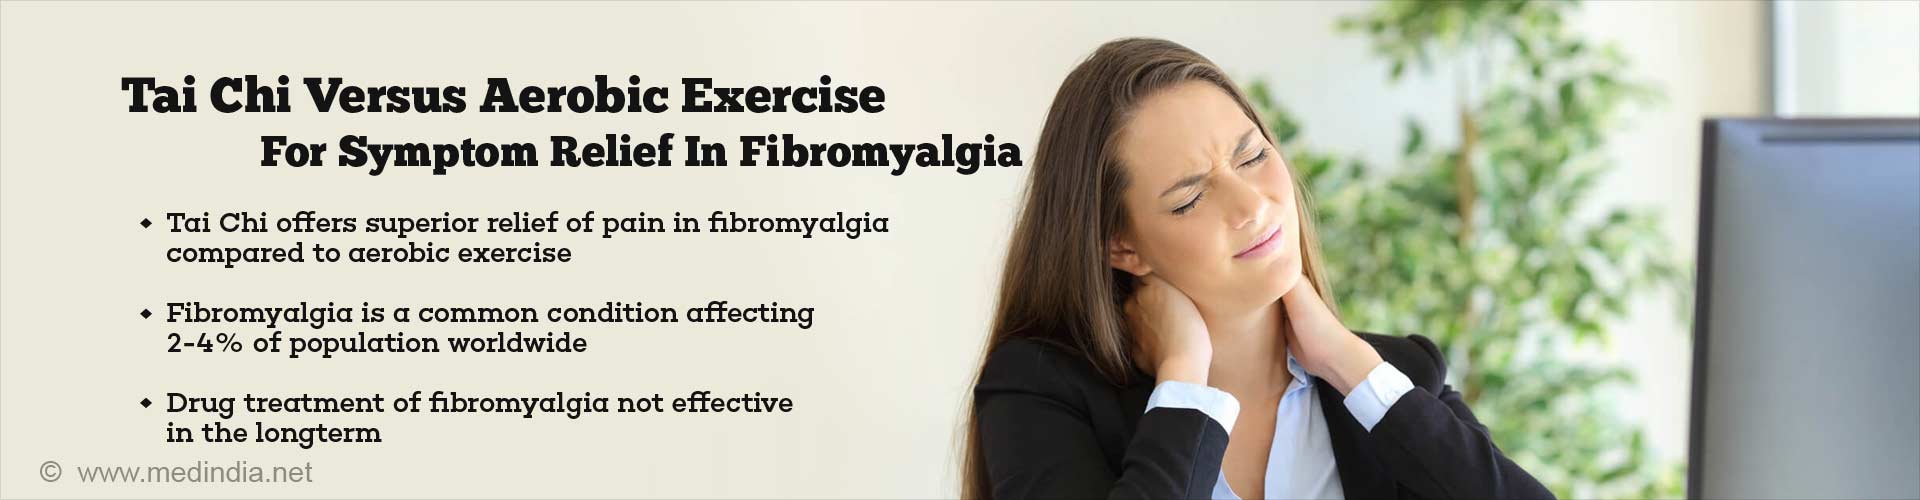 tai chi versus aerobic exercise for symptom relief in fibromyalgia
- tai chi offers superior relief pain in fibromyalgia compared to aerobic exercise
- fibromyalgia is a common condition affecting 2-4% of population worldwide
- drug treatment of fibromyalgia not effective in the longterm